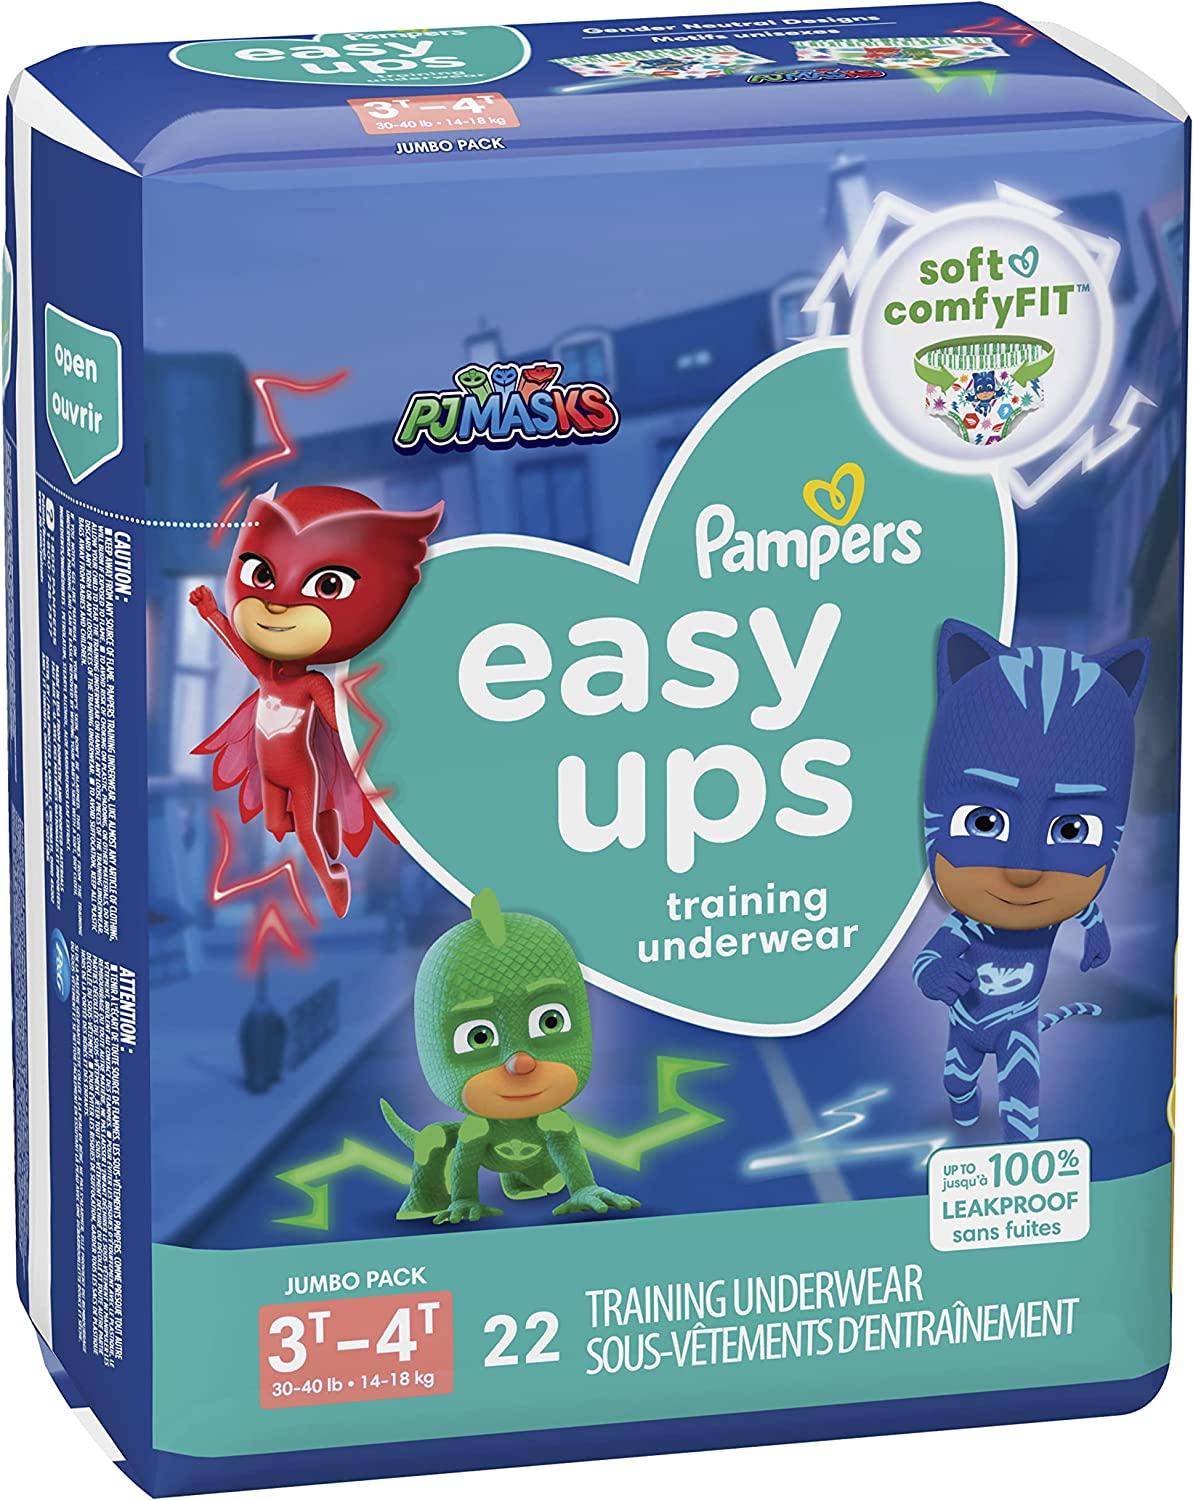 Pampers Boys' Easy UPS Training Underwear 3t - 4t for sale online